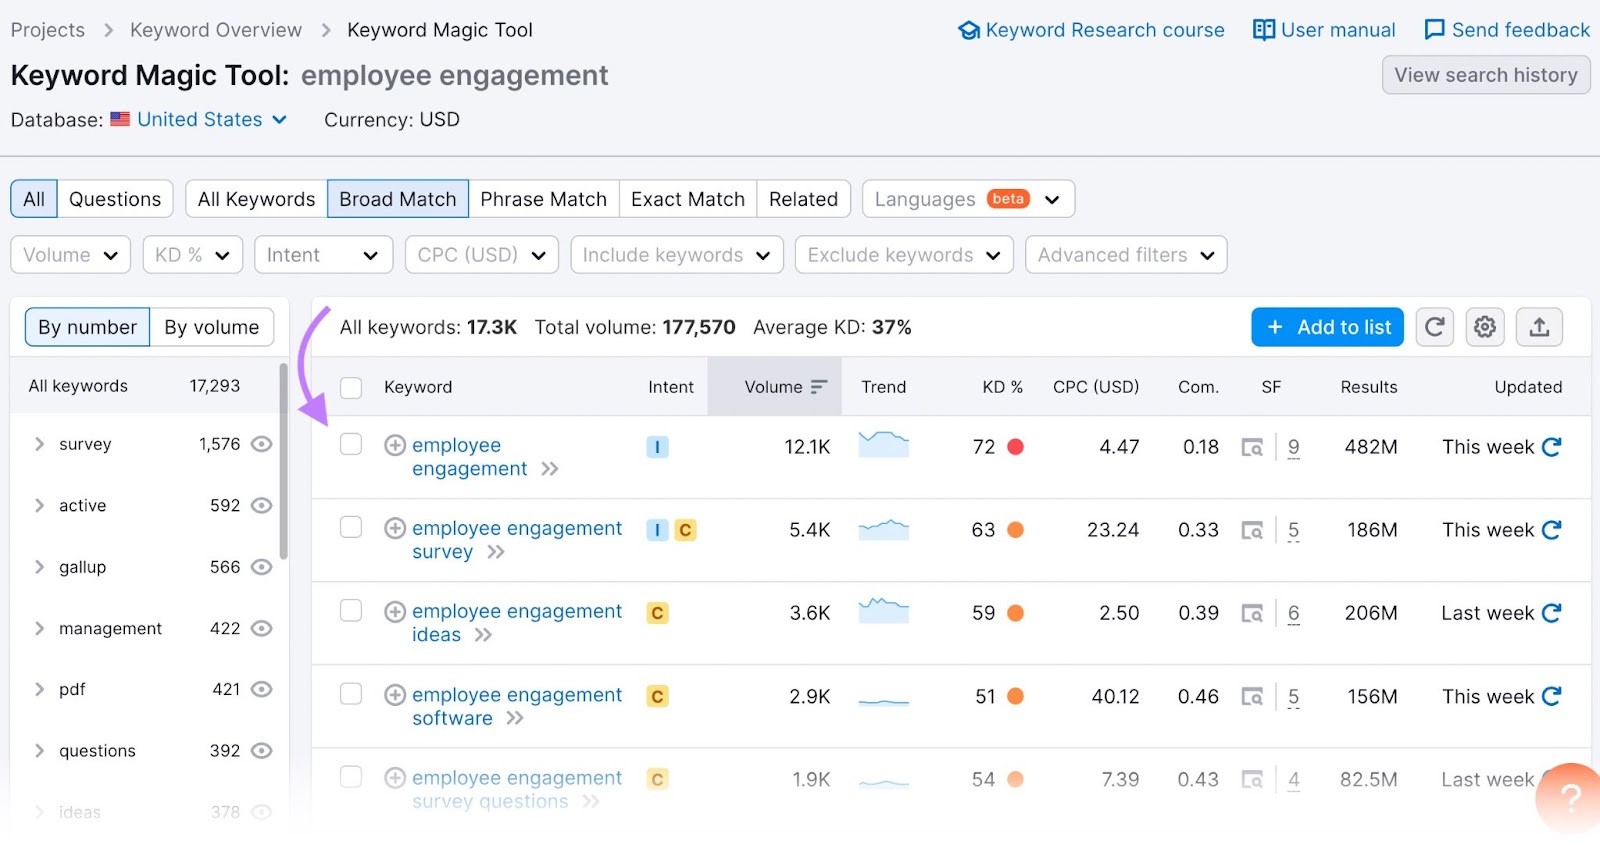 Keyword Magic Tool results for "employee management"